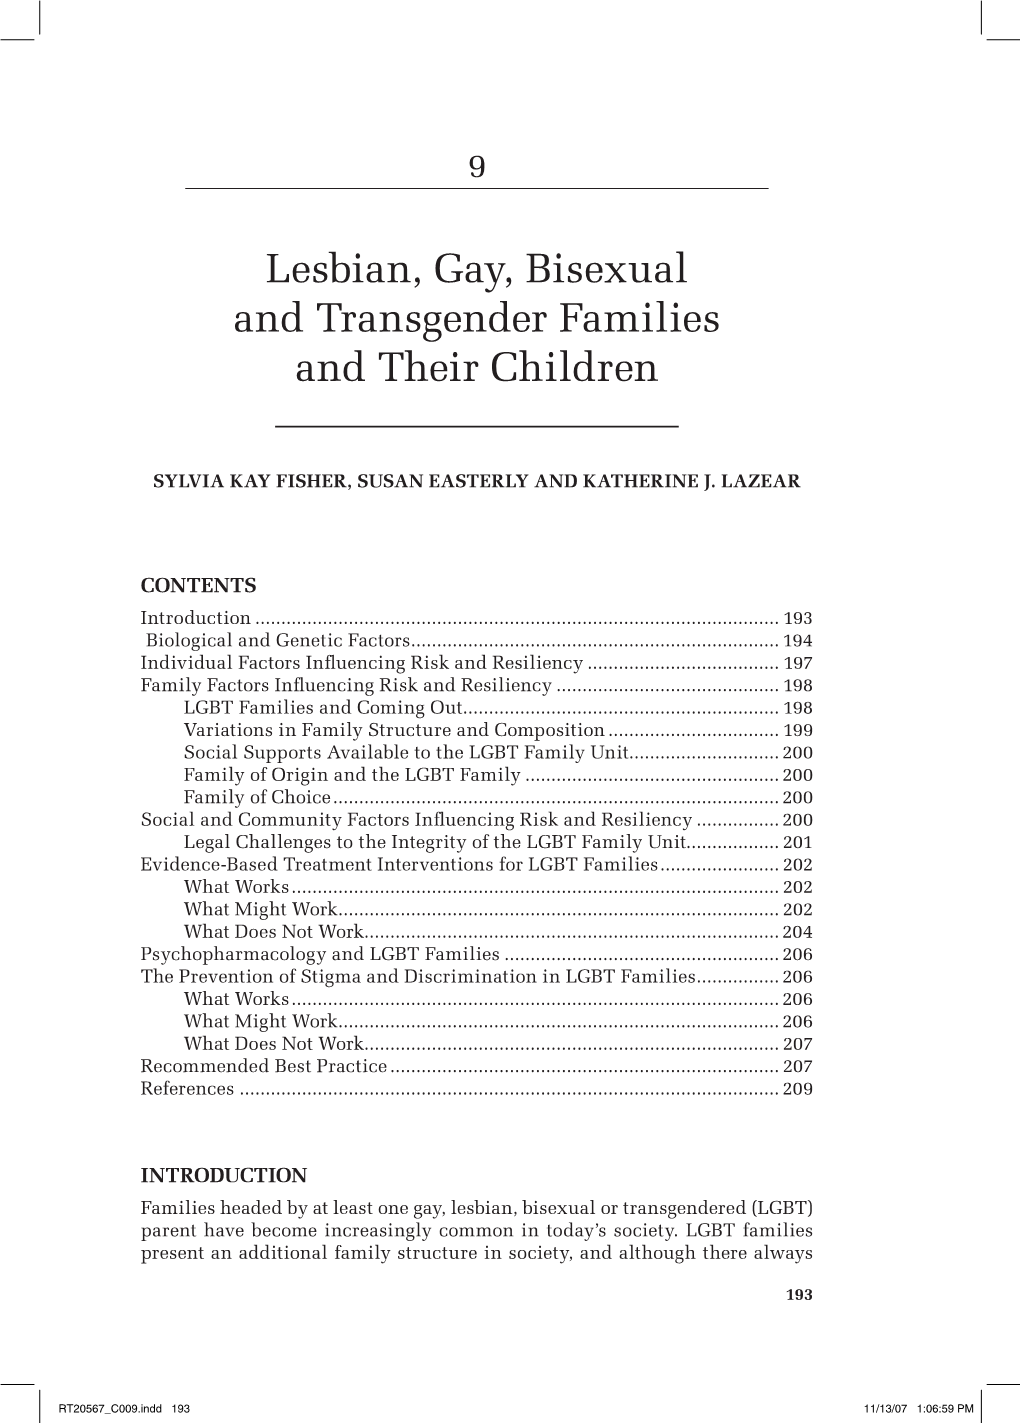 Lesbian, Gay, Bisexual and Transgender Families and Their Children